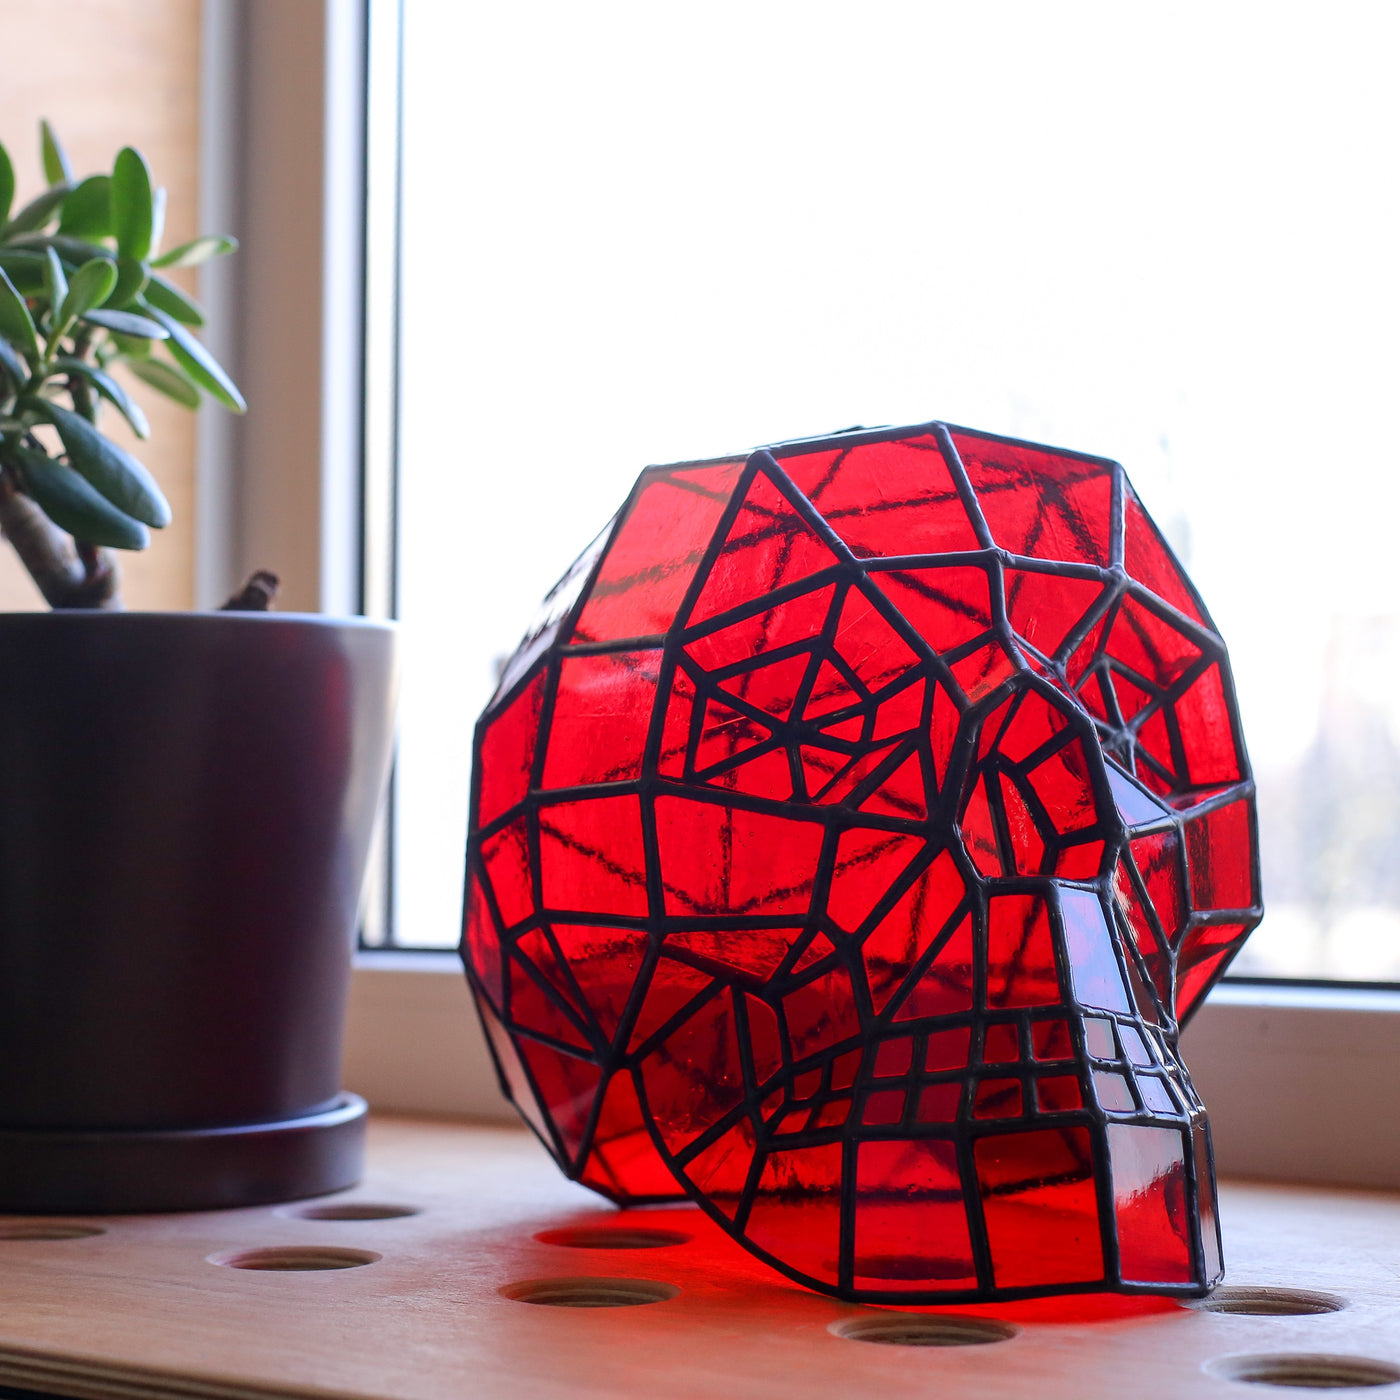 Red-coloured stained glass 3D human skull for ghastly Halloween 